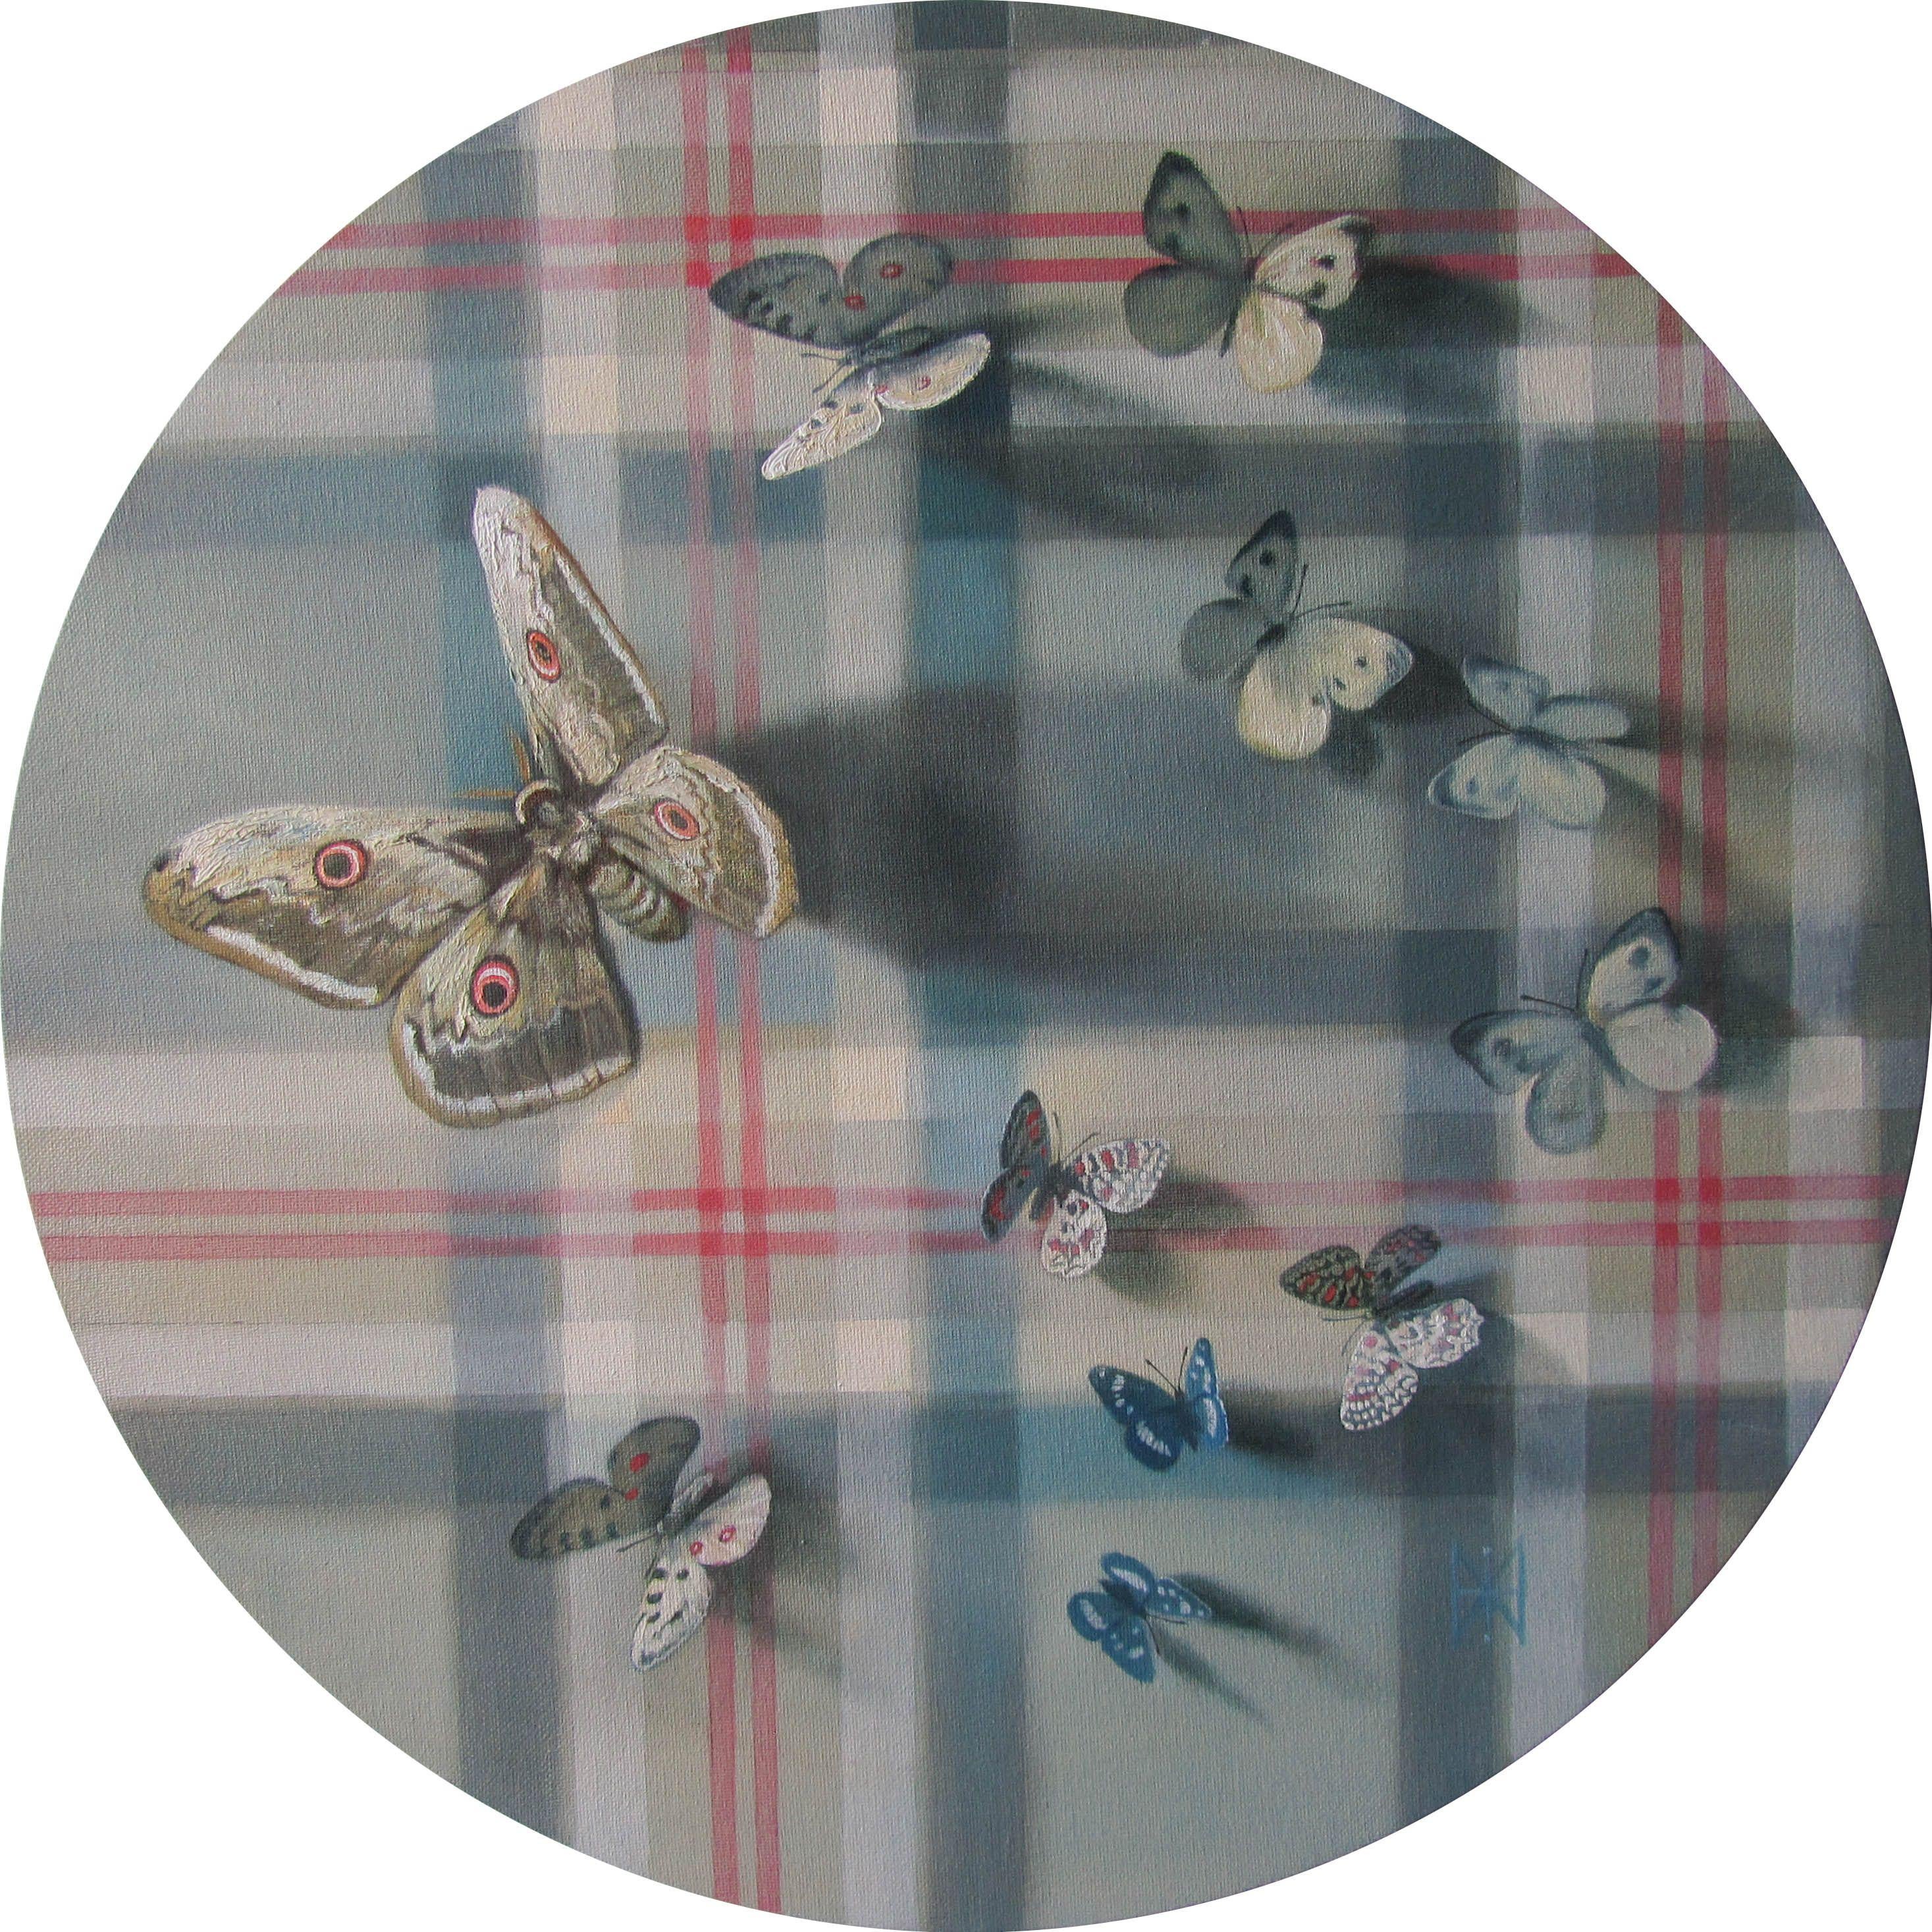 Butterflies on tartan is the round picture on the pattern like the Burberry one. Its diameter is 19.7 inches. This is the first picture from a series of round pictures with butterflies. The color scheme in which the paintings are made is chosen in